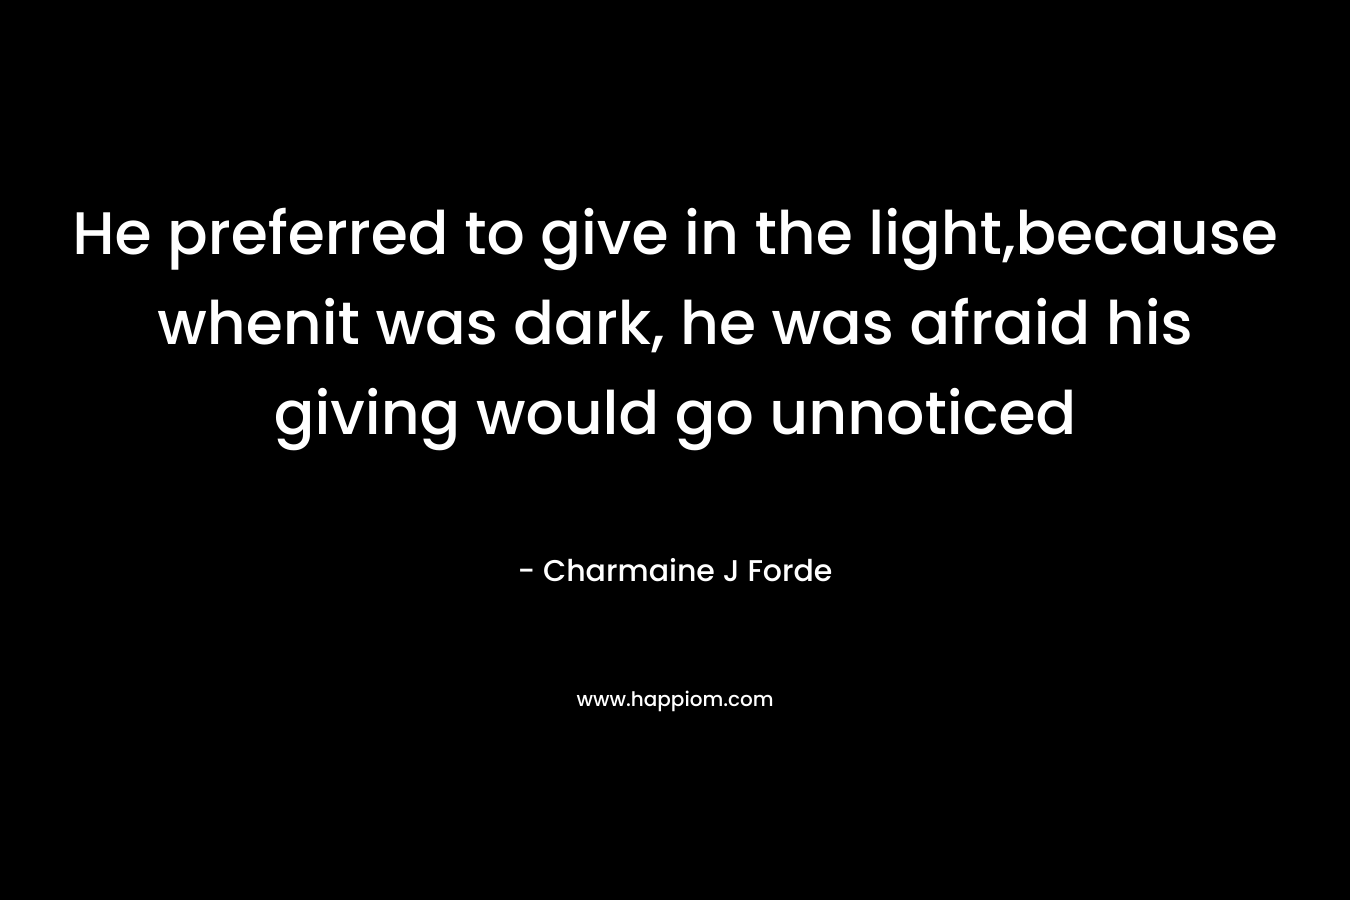 He preferred to give in the light,because whenit was dark, he was afraid his giving would go unnoticed